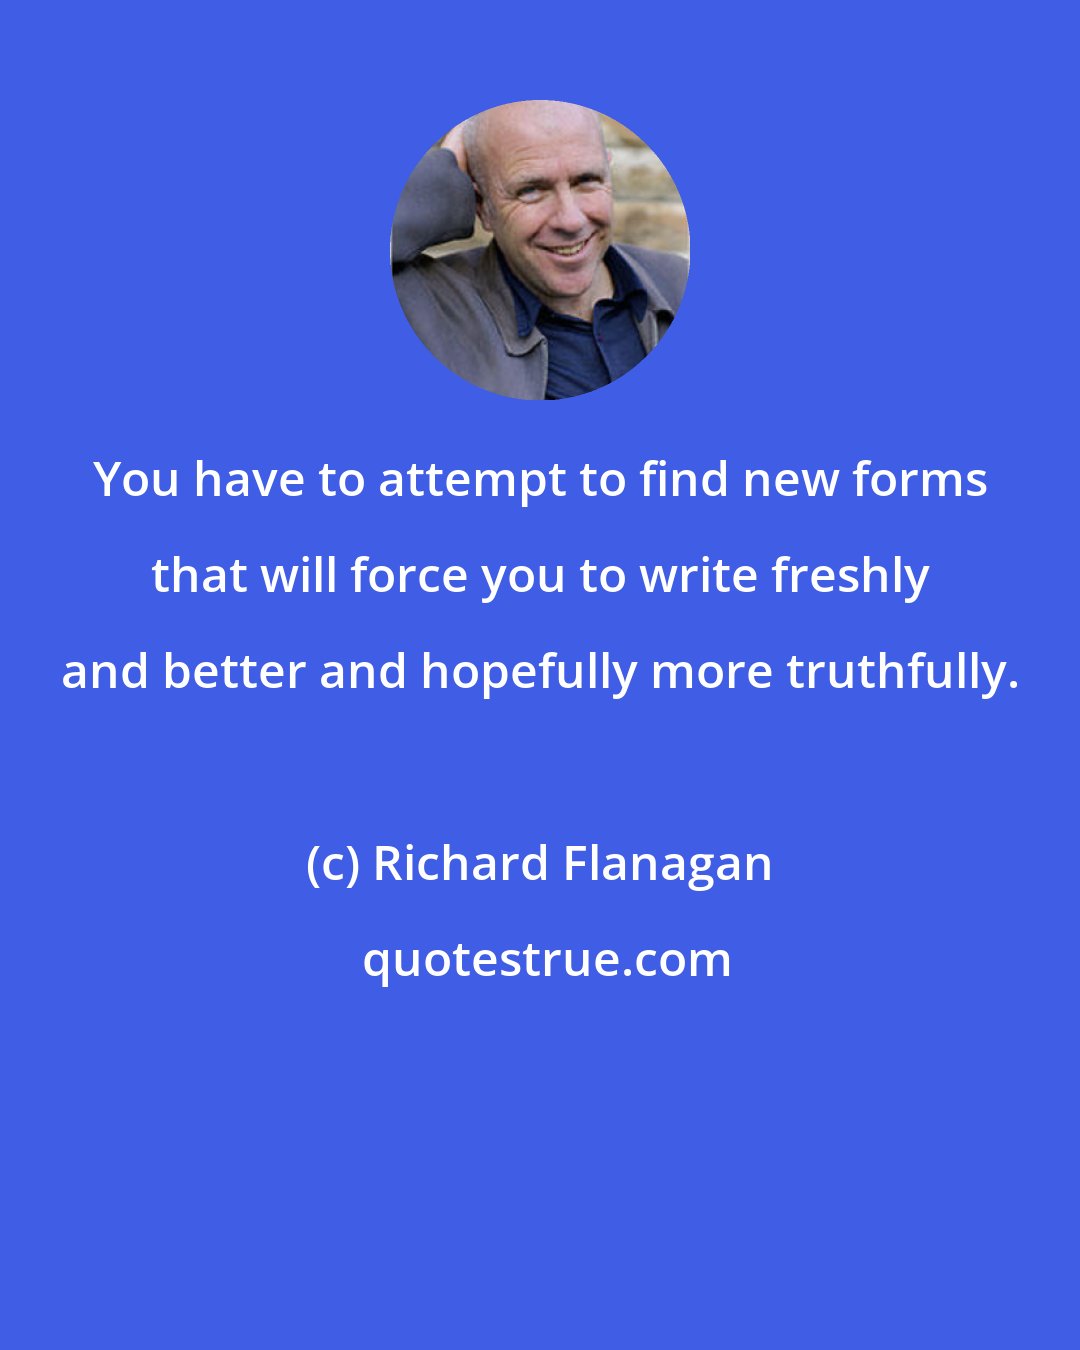 Richard Flanagan: You have to attempt to find new forms that will force you to write freshly and better and hopefully more truthfully.